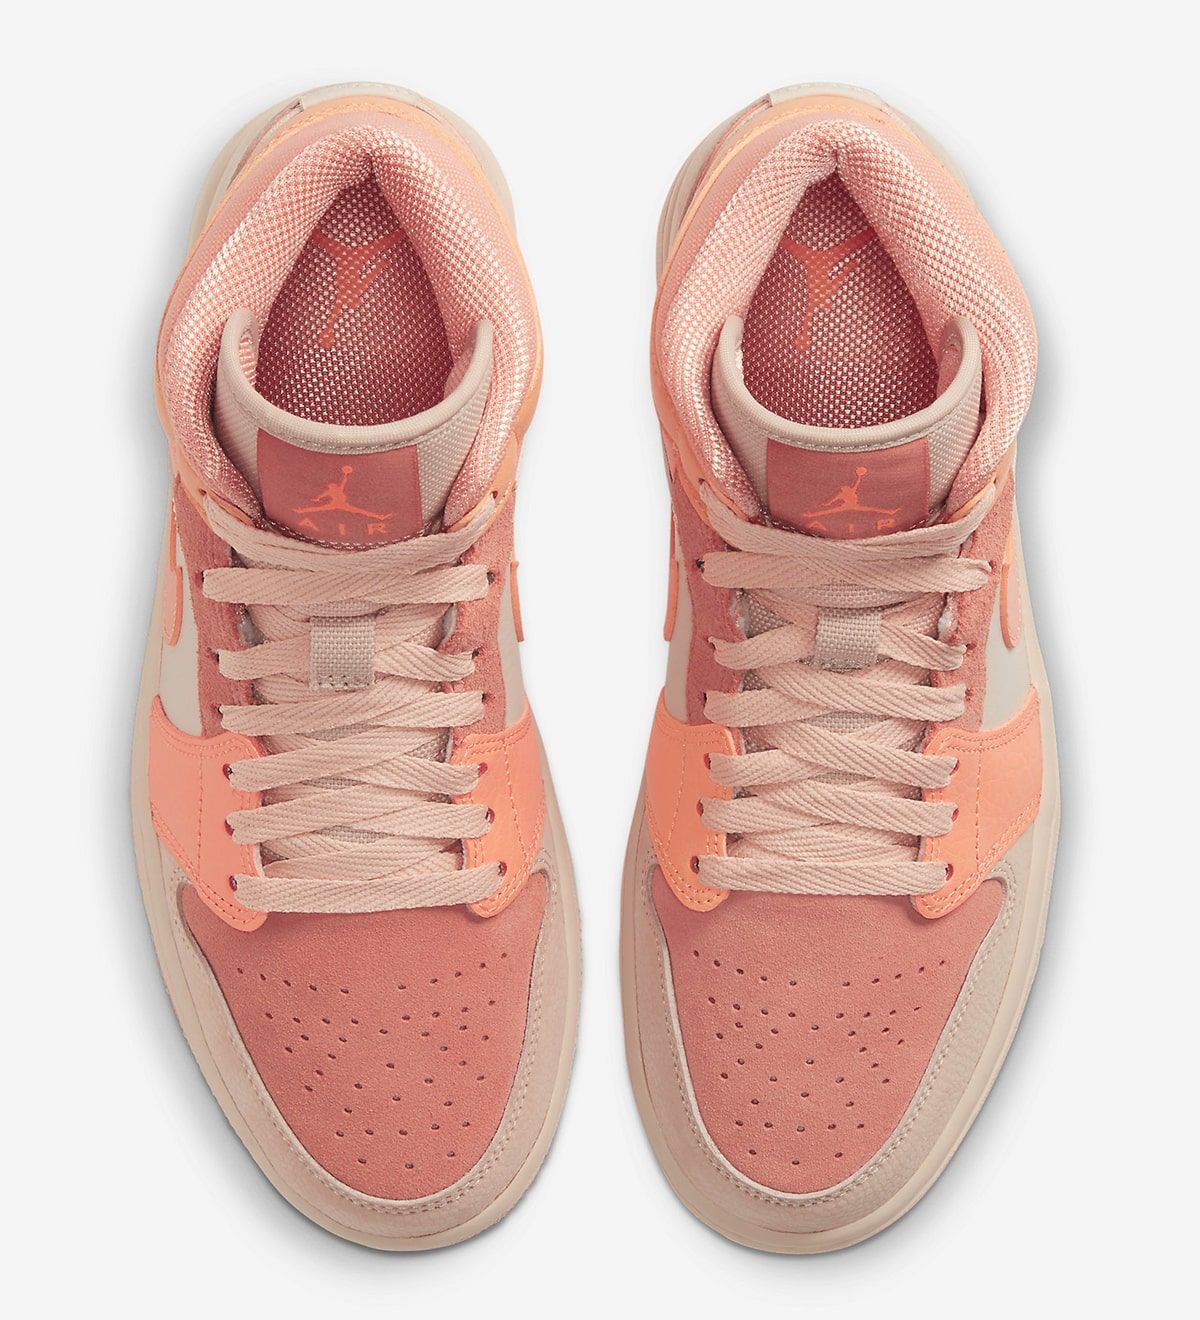 Air Jordan 1 Mid “Apricot” Will Be Another Hard-To-Come-By Cop | HOUSE ...